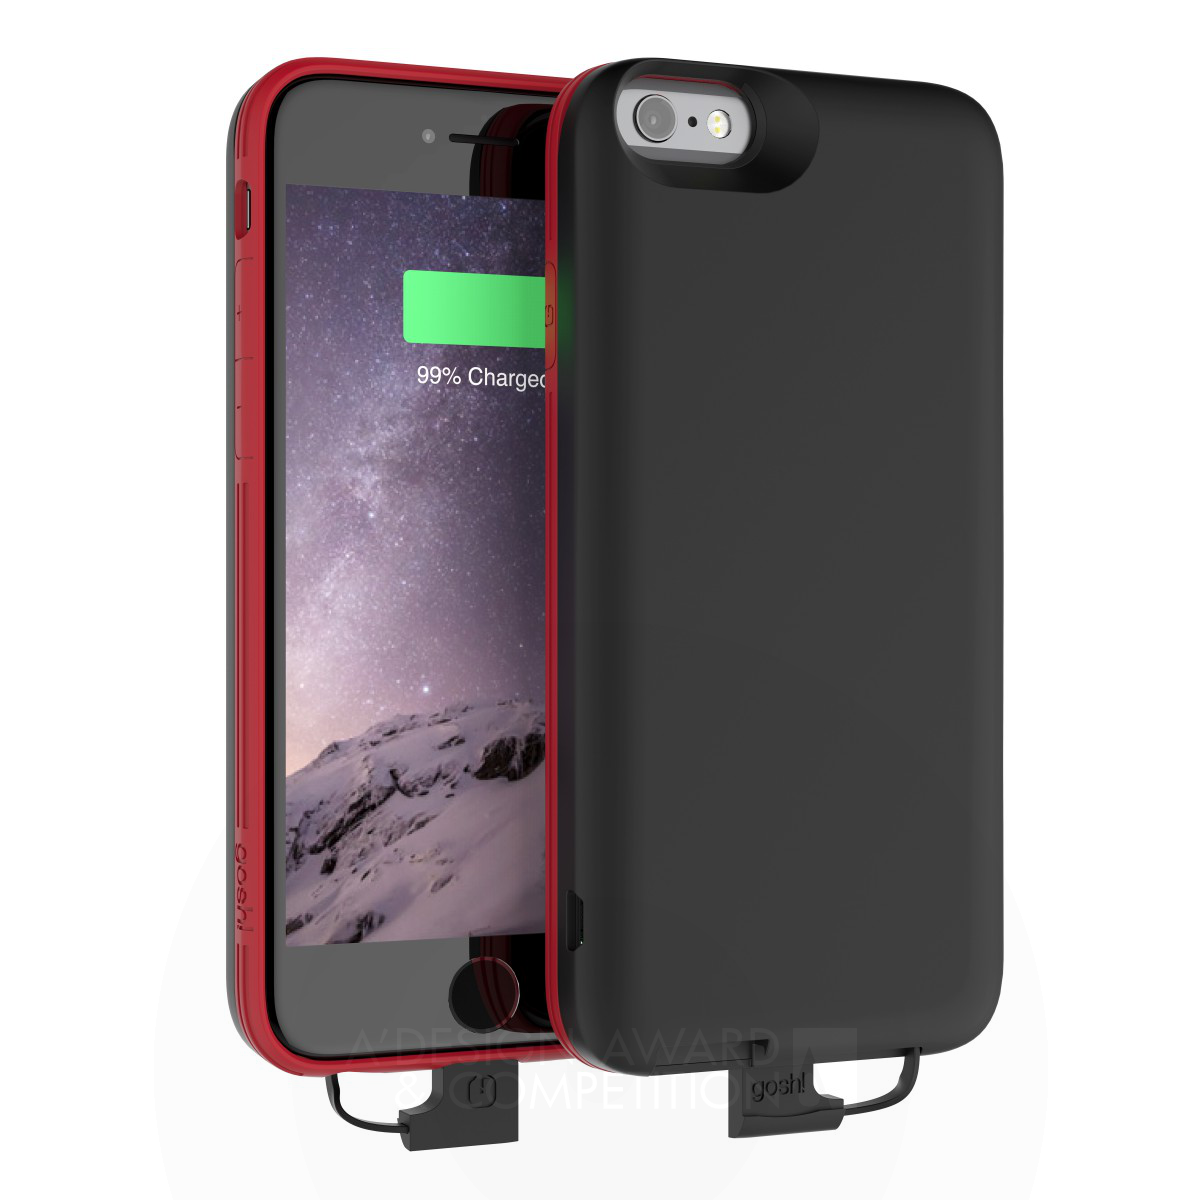 Parallel 2: The Sleek and Powerful Battery Case for iPhone 6